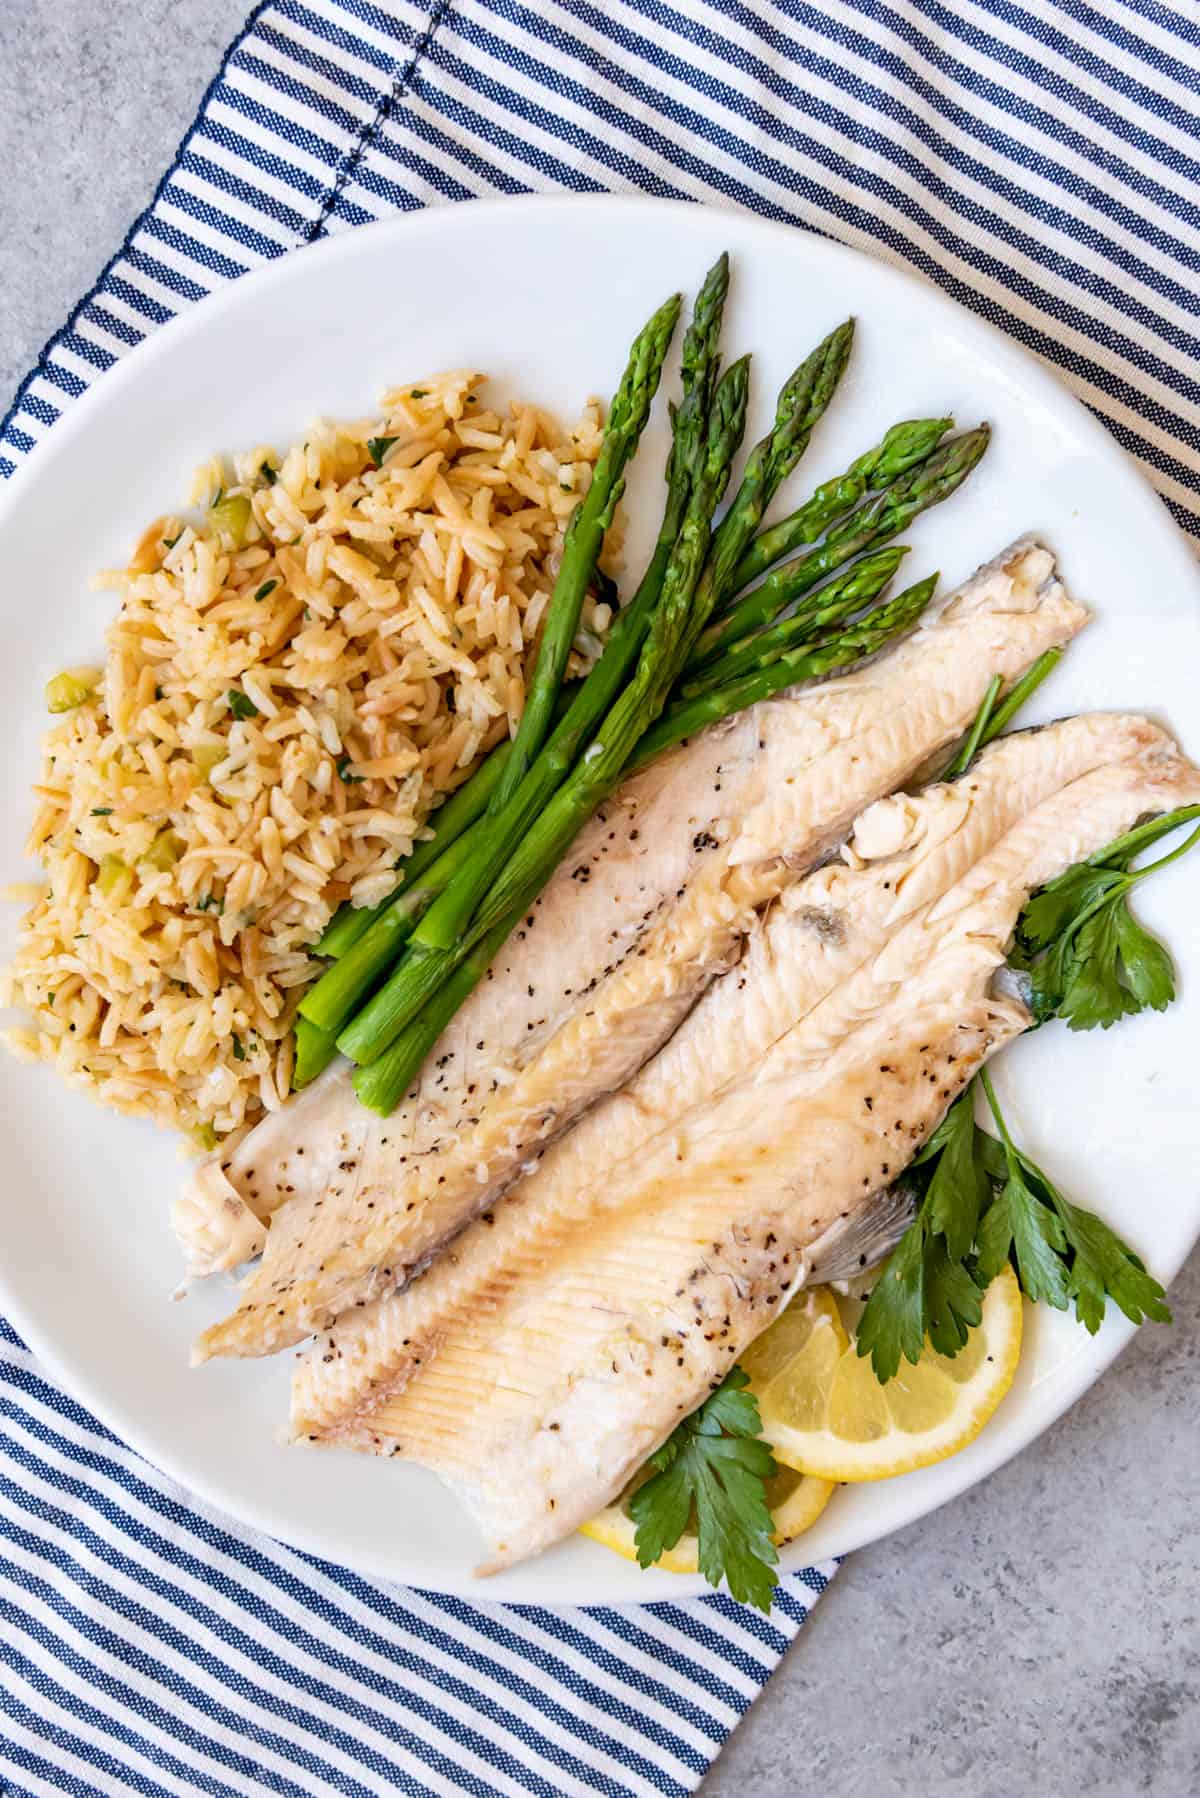 An image of baked rainbow trout fillets on a plate with homemade rice pilaf and roasted asparagus.